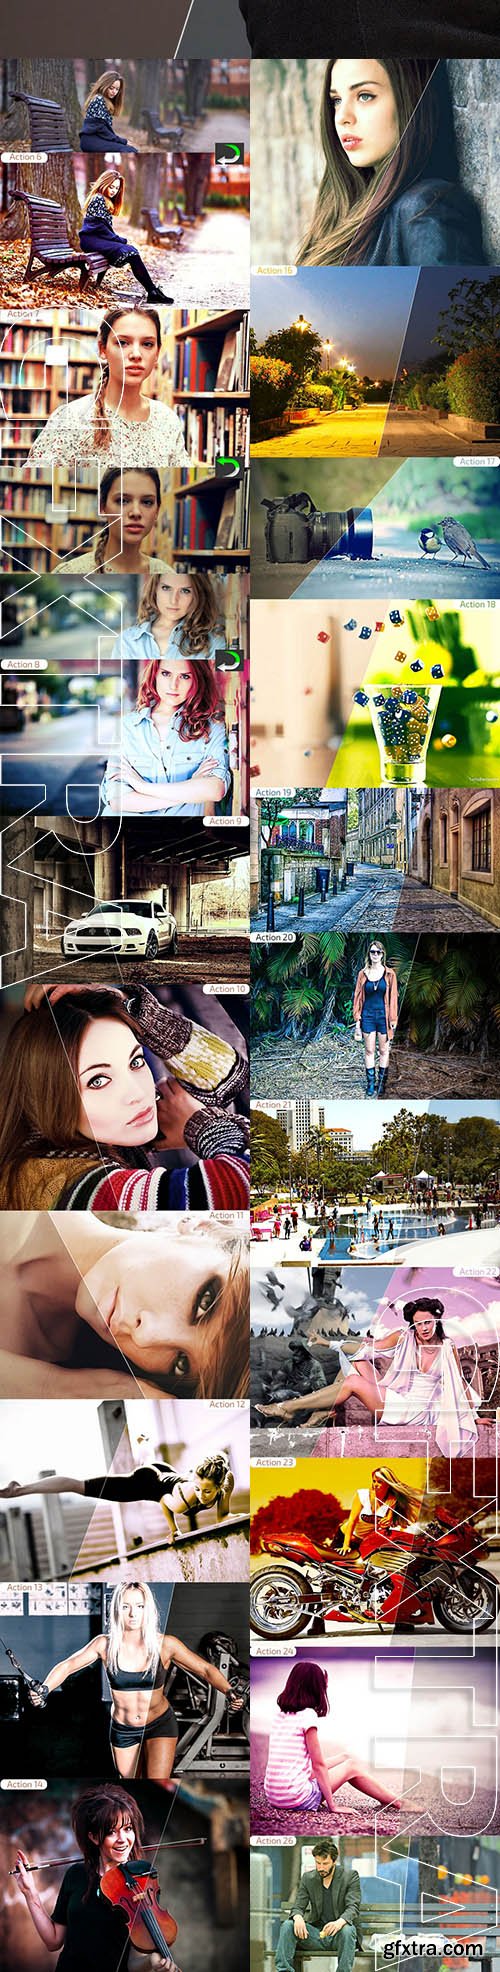 30 High Quality Photo Action - GraphicRiver 9107096